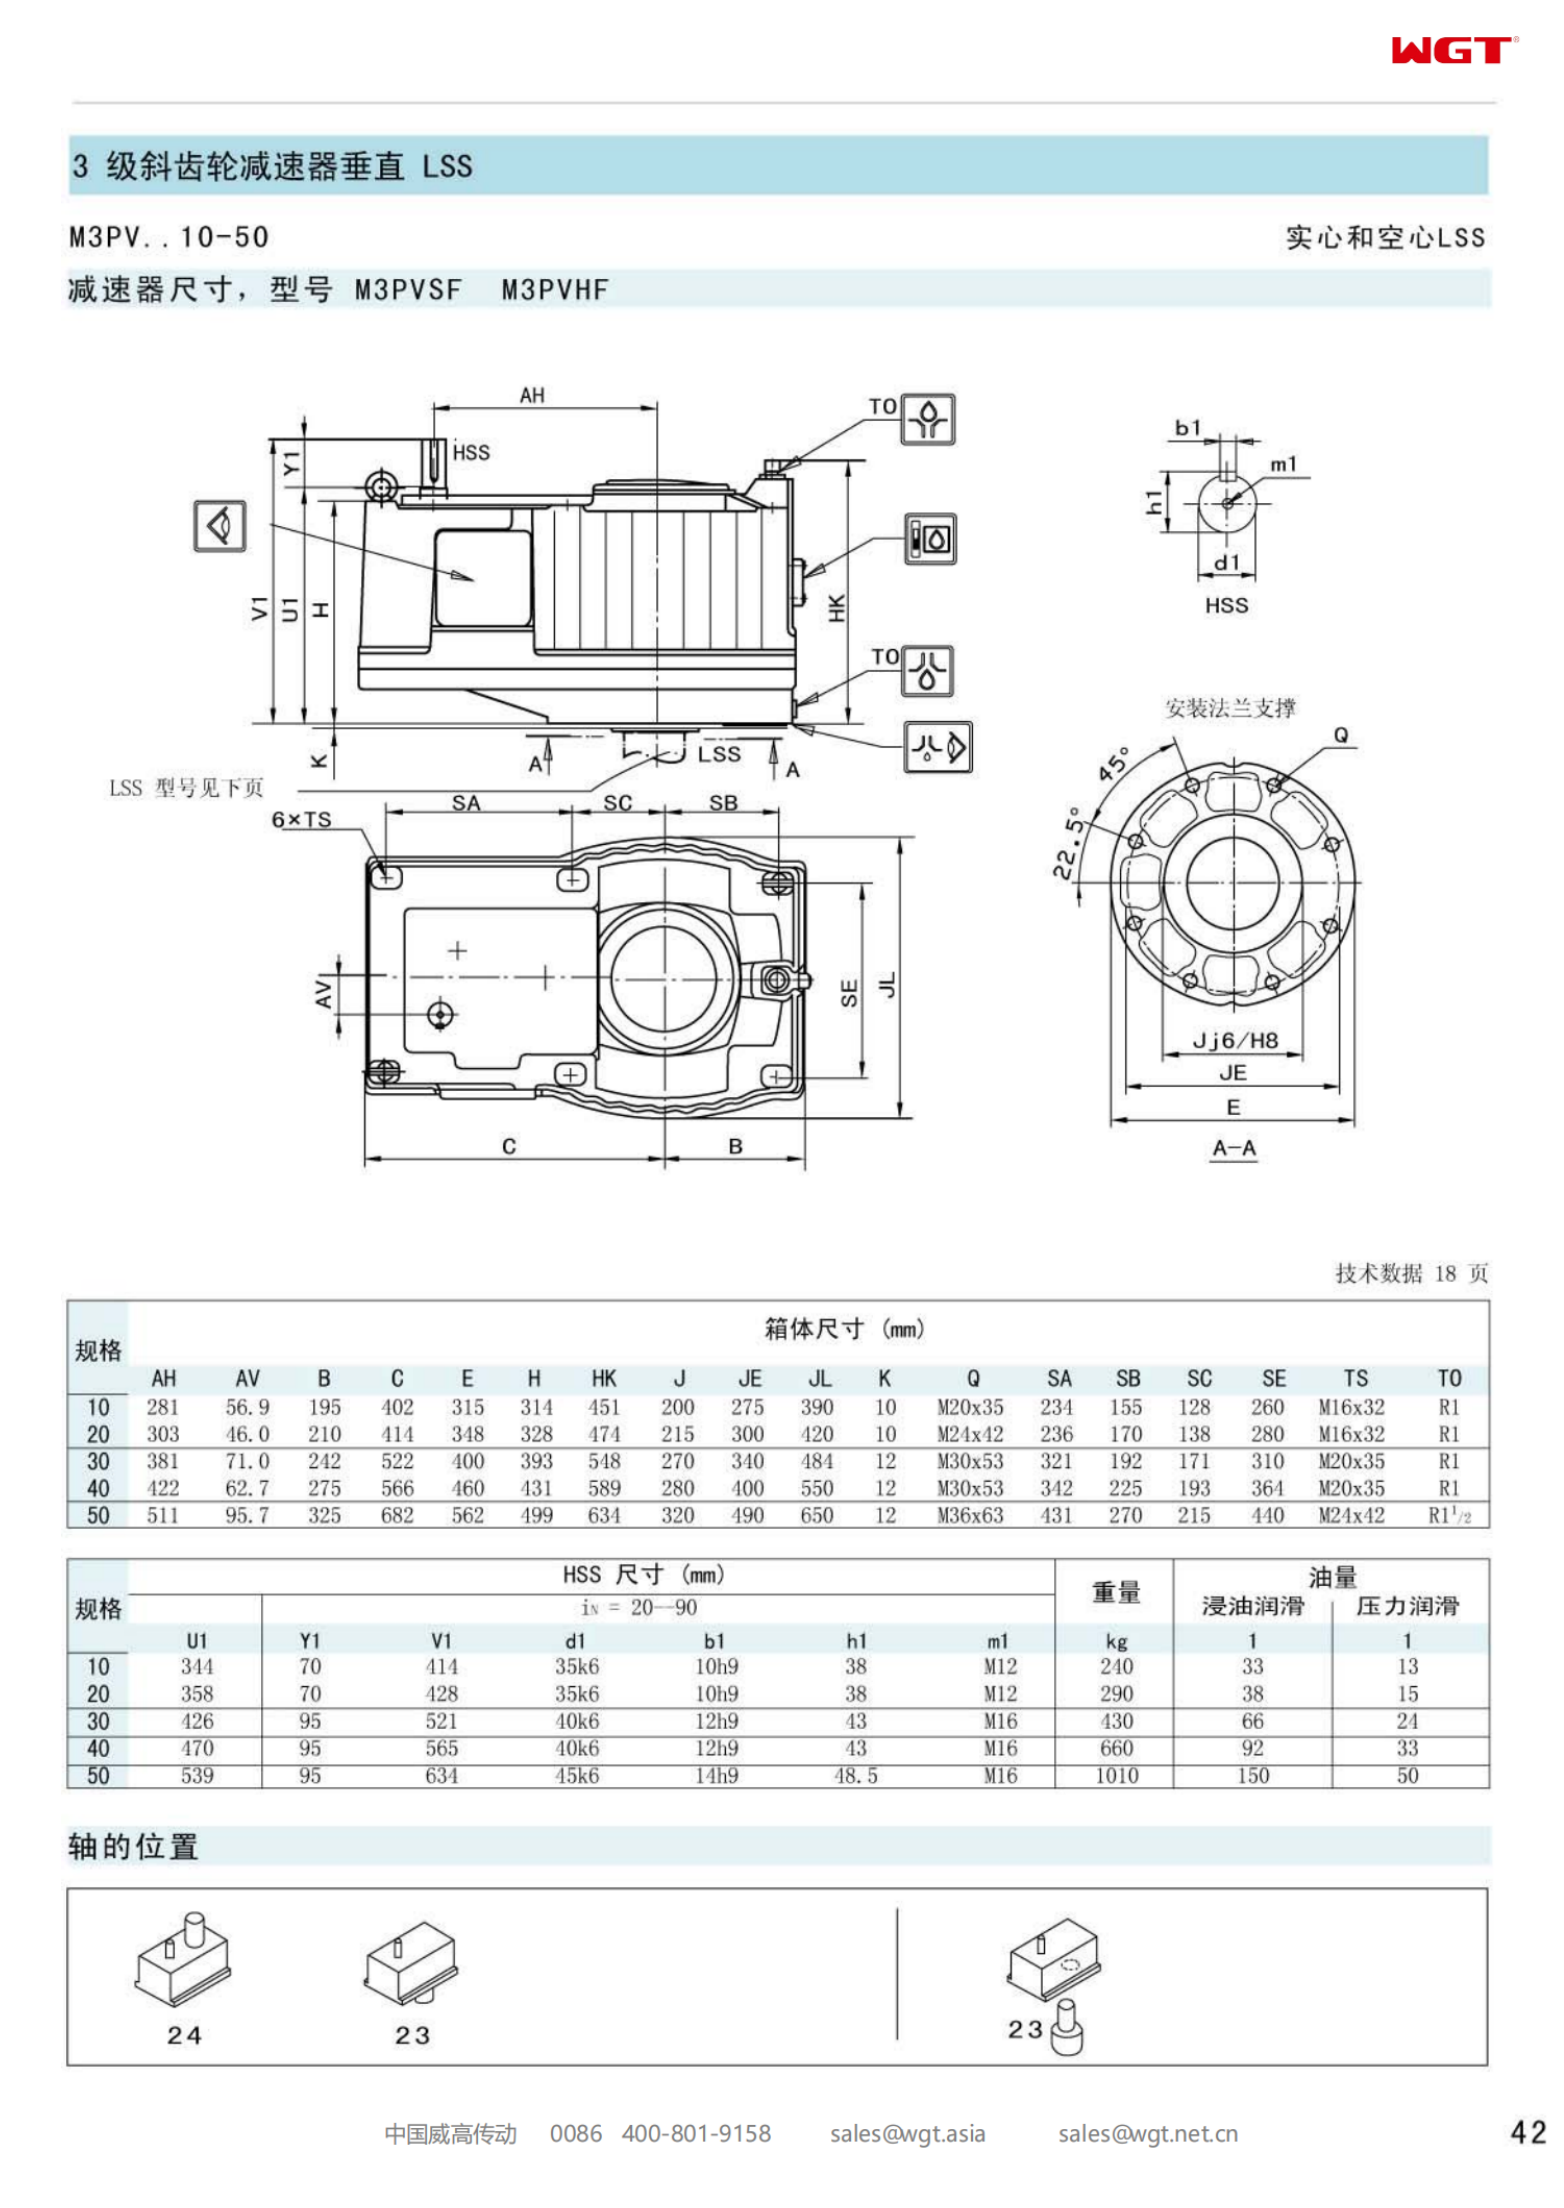 M3PVSF50 Replace_SEW_M_Series Gearbox